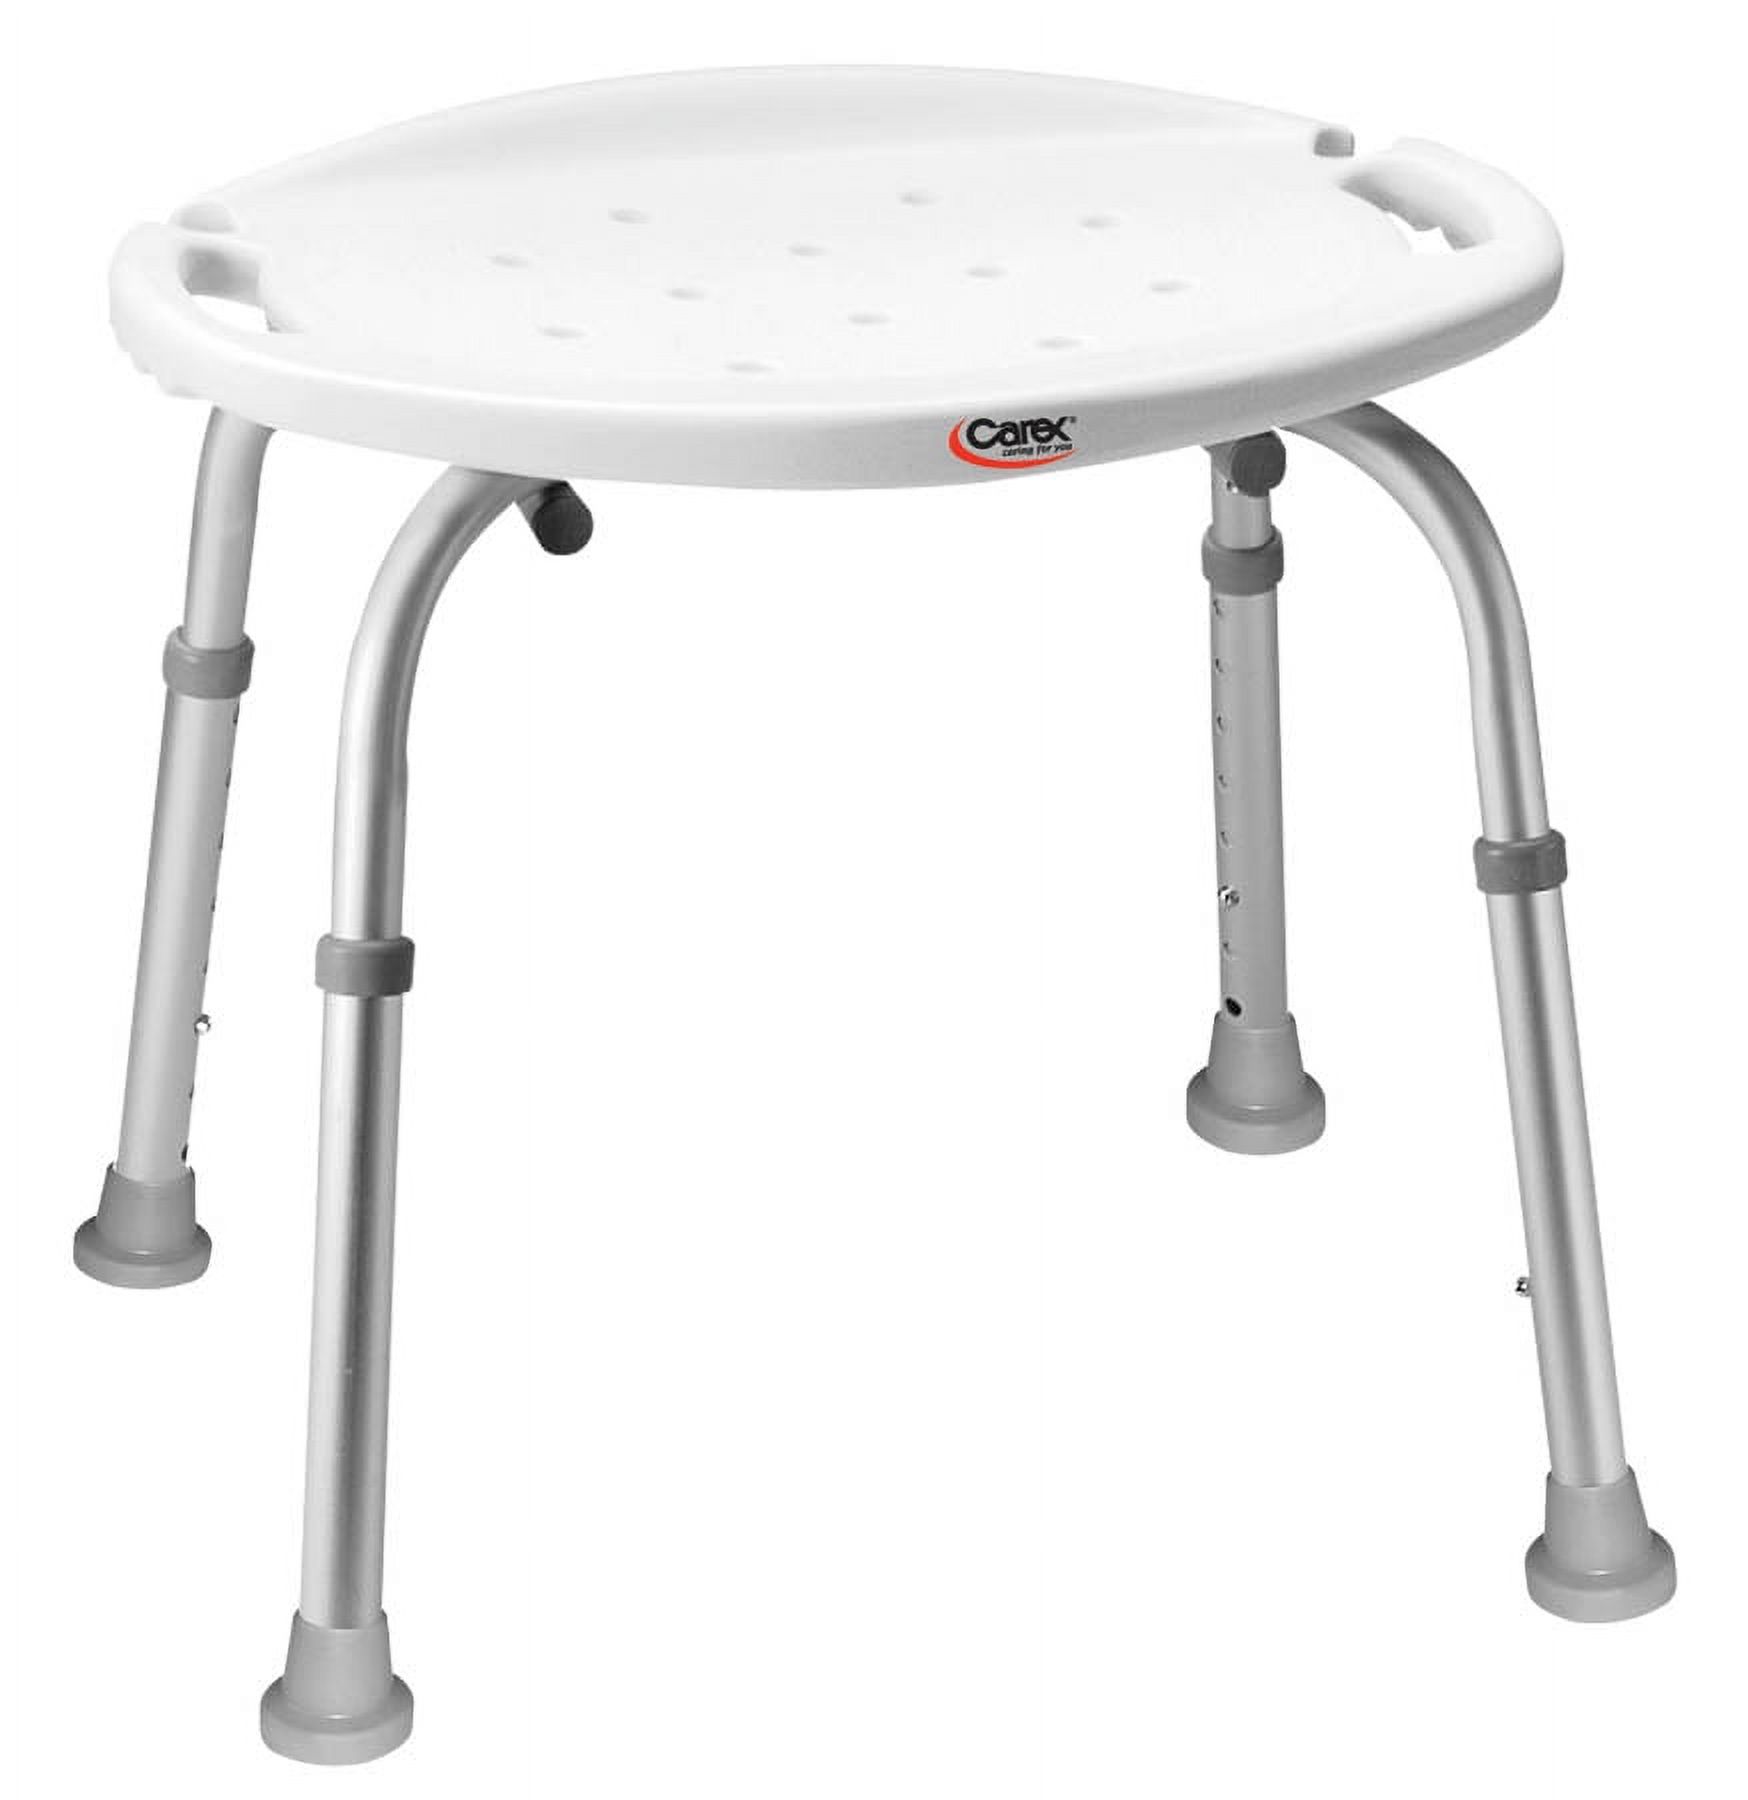 Carex Aluminium Bath and Shower Chair with Height Adjustable Legs, Built-in Notch, 300 lb Capacity - image 1 of 10